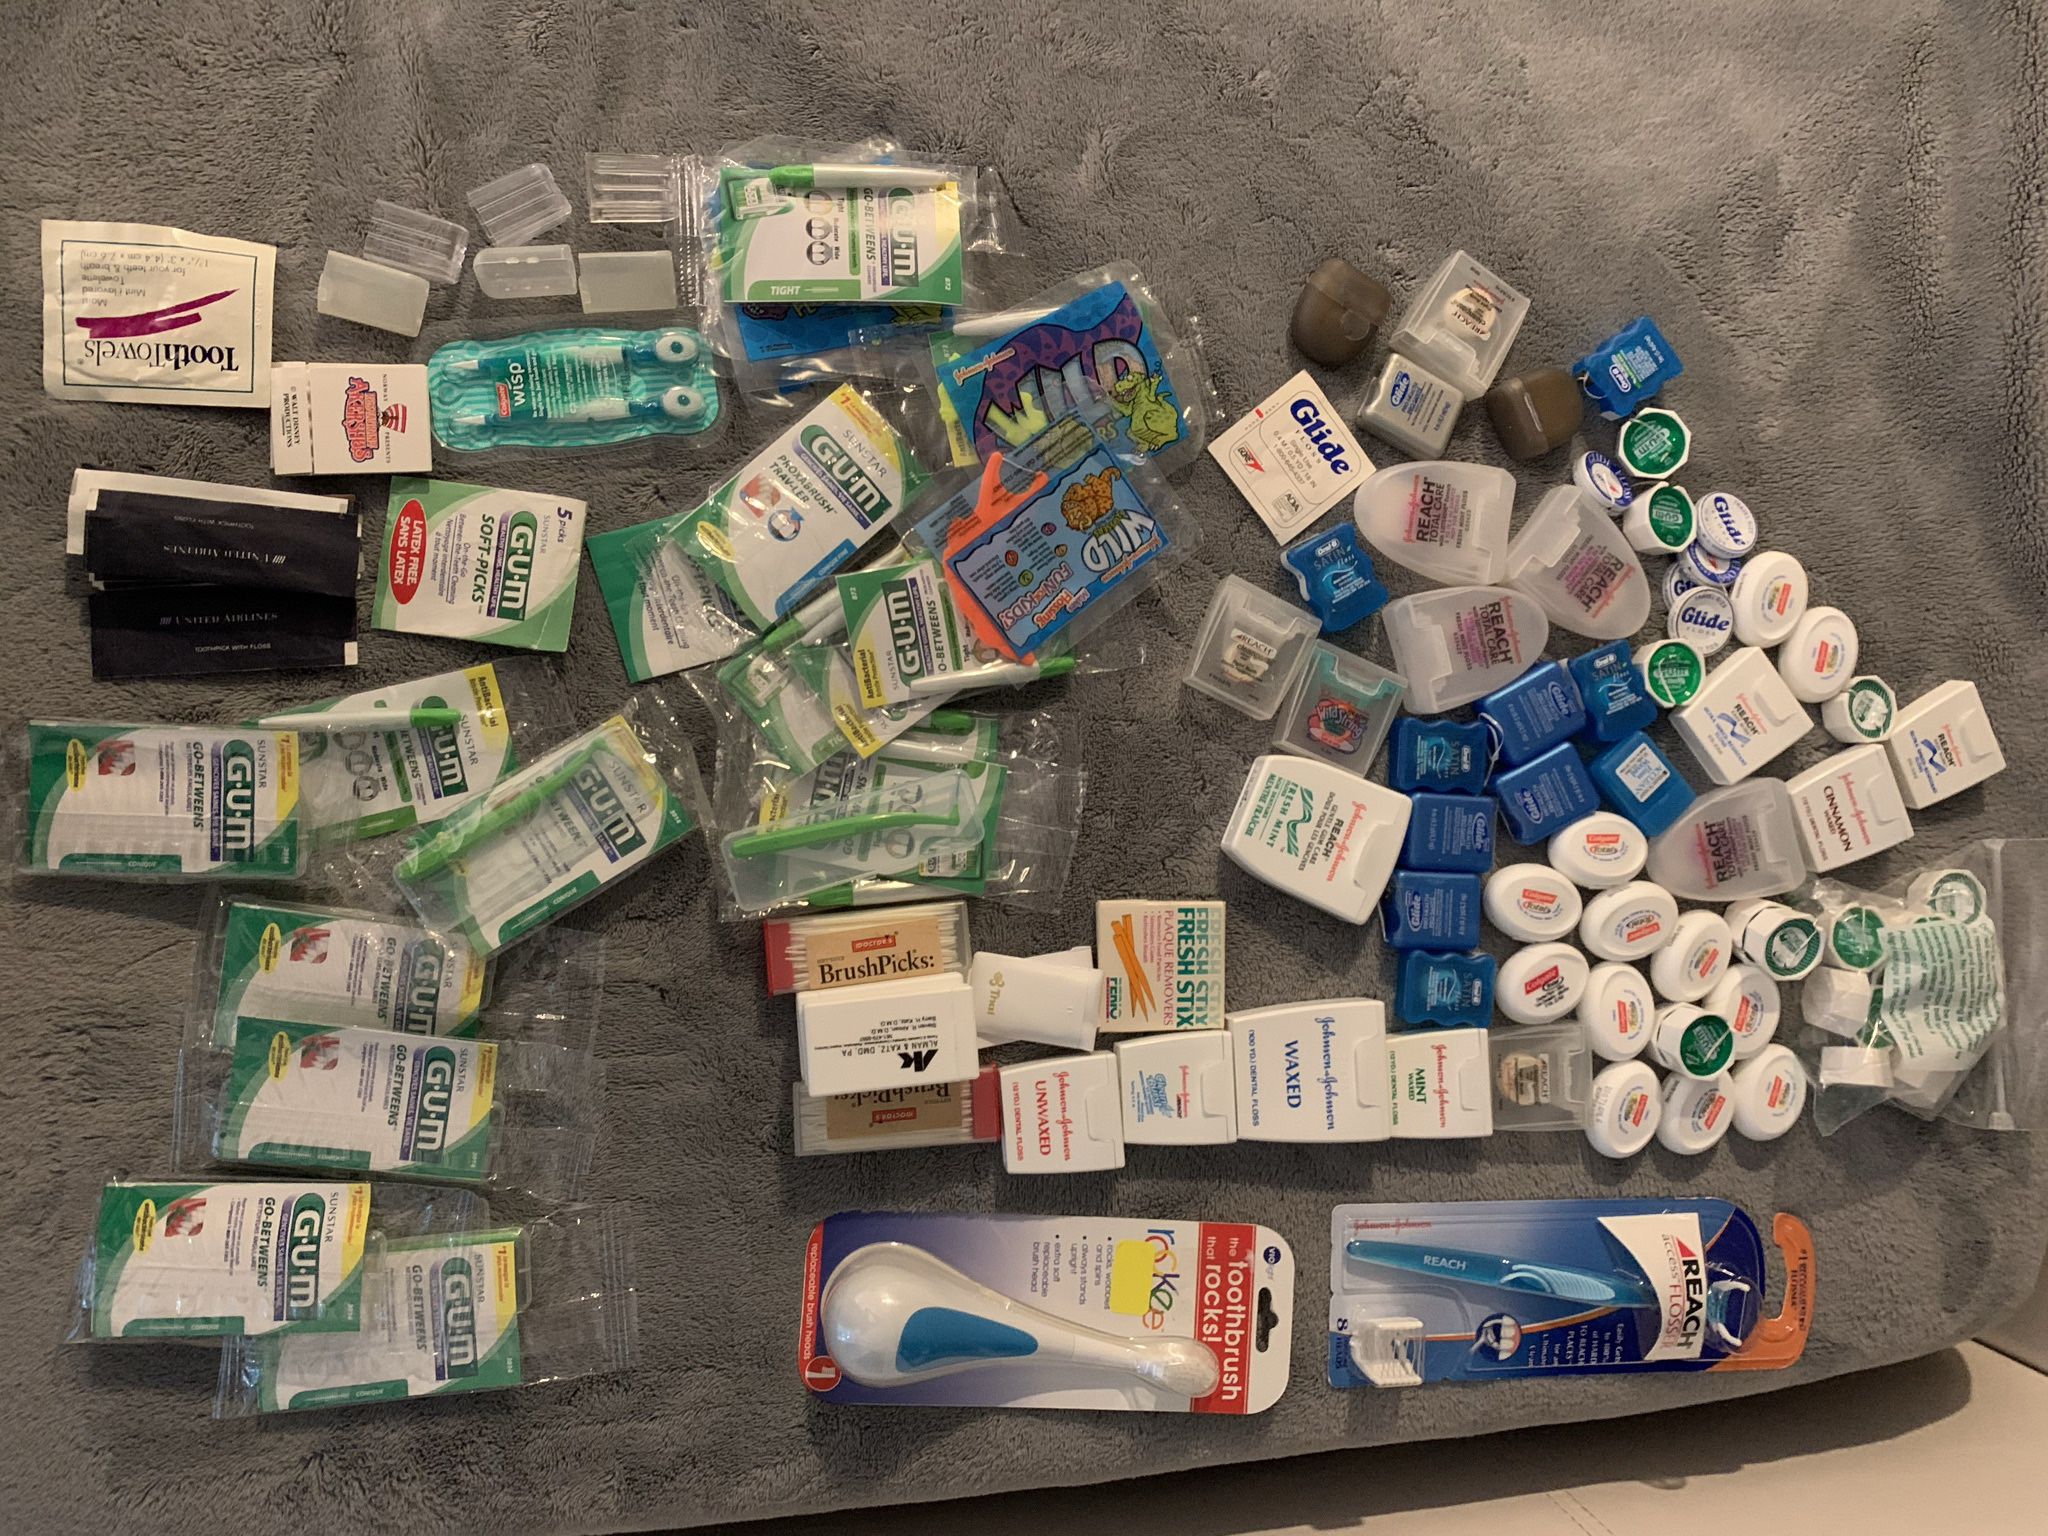 Dental Supplies (brand new toothbrushes, Dental Floss & Picks) - Pick Up From Brickell (33131)